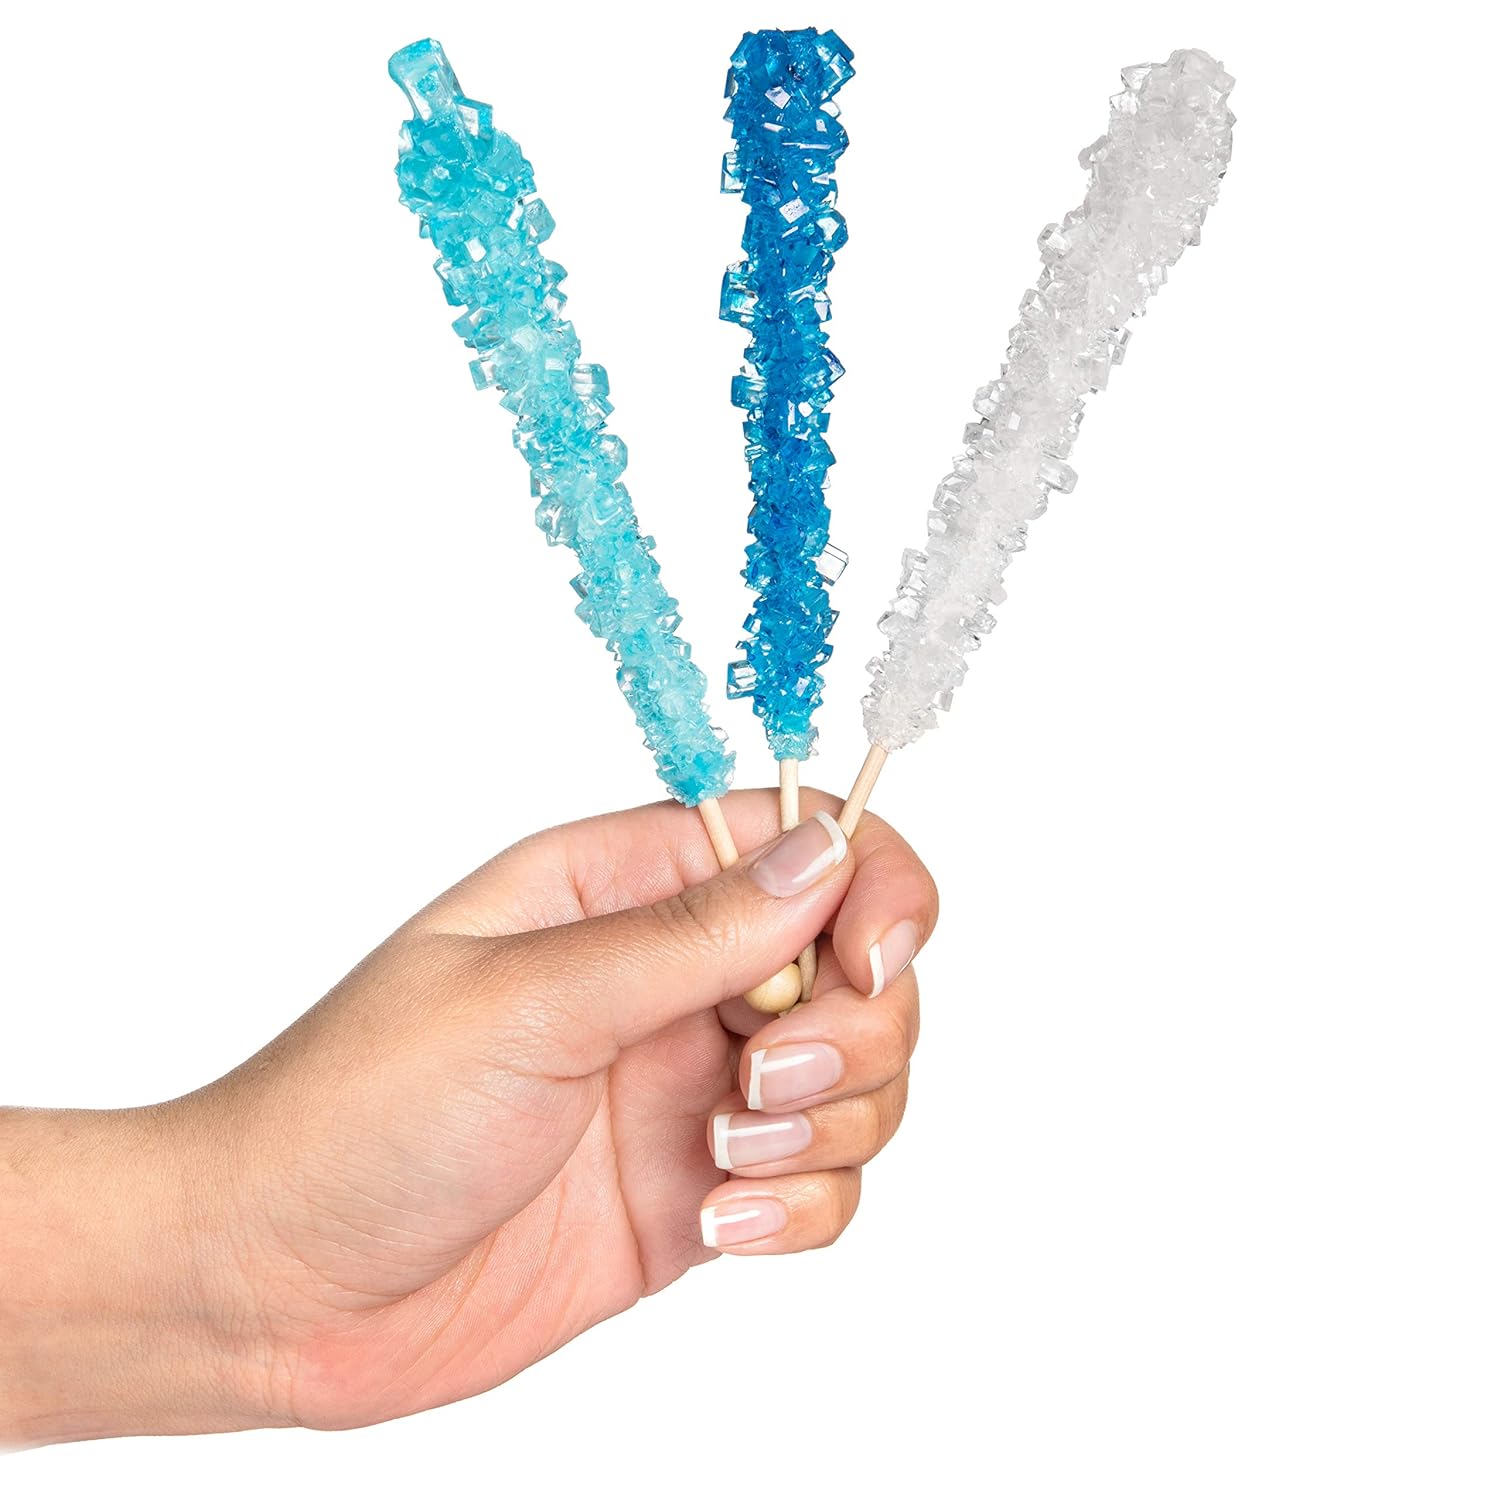  Candy Buffet Store - Rock Candy On a Stick, Light Blue (Cotton Candy Flavored, 36 Count). Great for Frozen movie and Elsa Parties